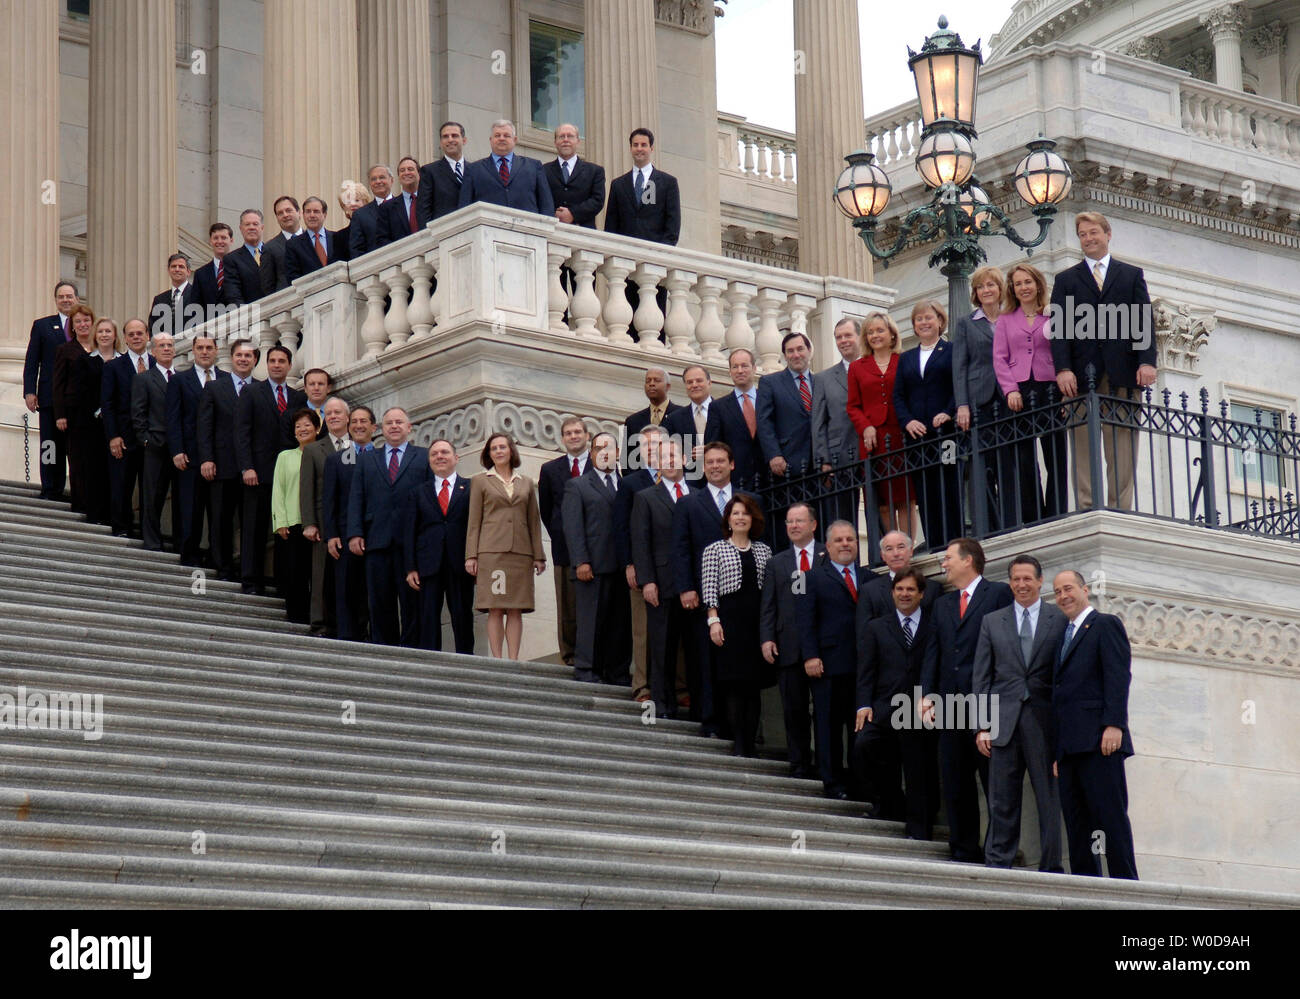 The freshman class of the 110th Congress pose for a group photo on the East Front Steps of the House side of the U.S. Capitol Building, in Washington on November 14, 2006. The Democrats take control of both the House and Senate in January.  (UPI Photo/Kevin Dietsch) Stock Photo